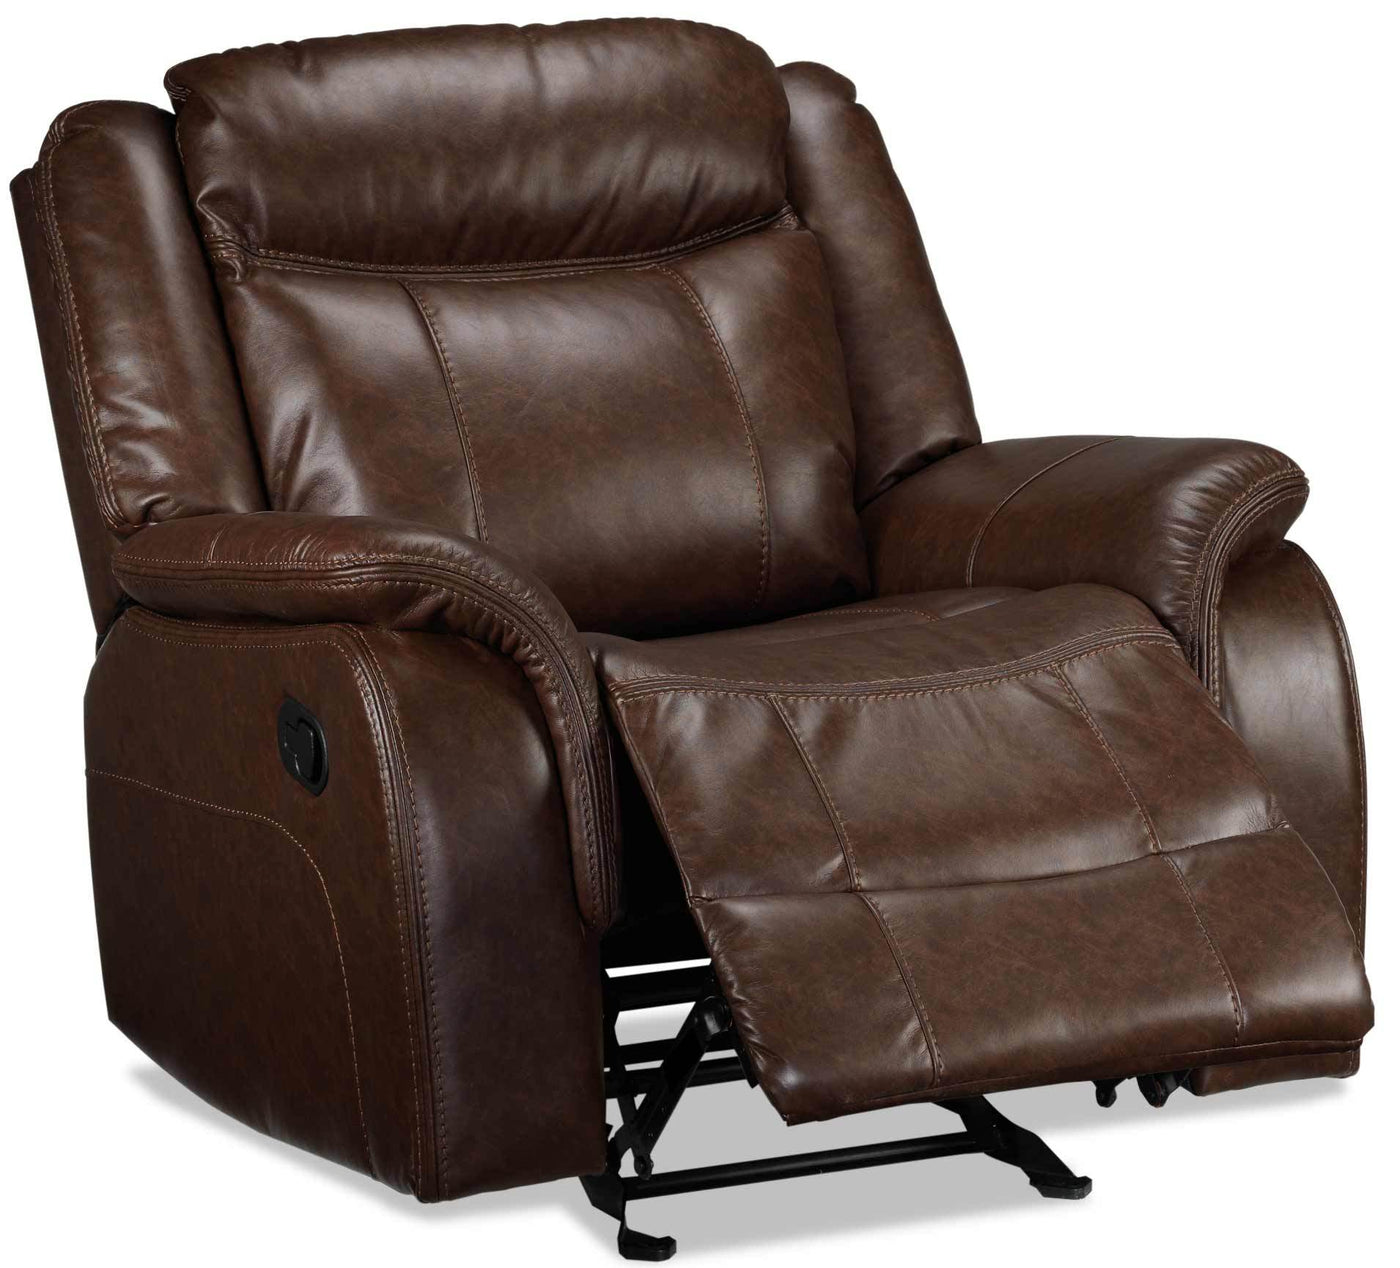 Scorpio Reclining Sofa and Glider Recliner - Whiskey Brown